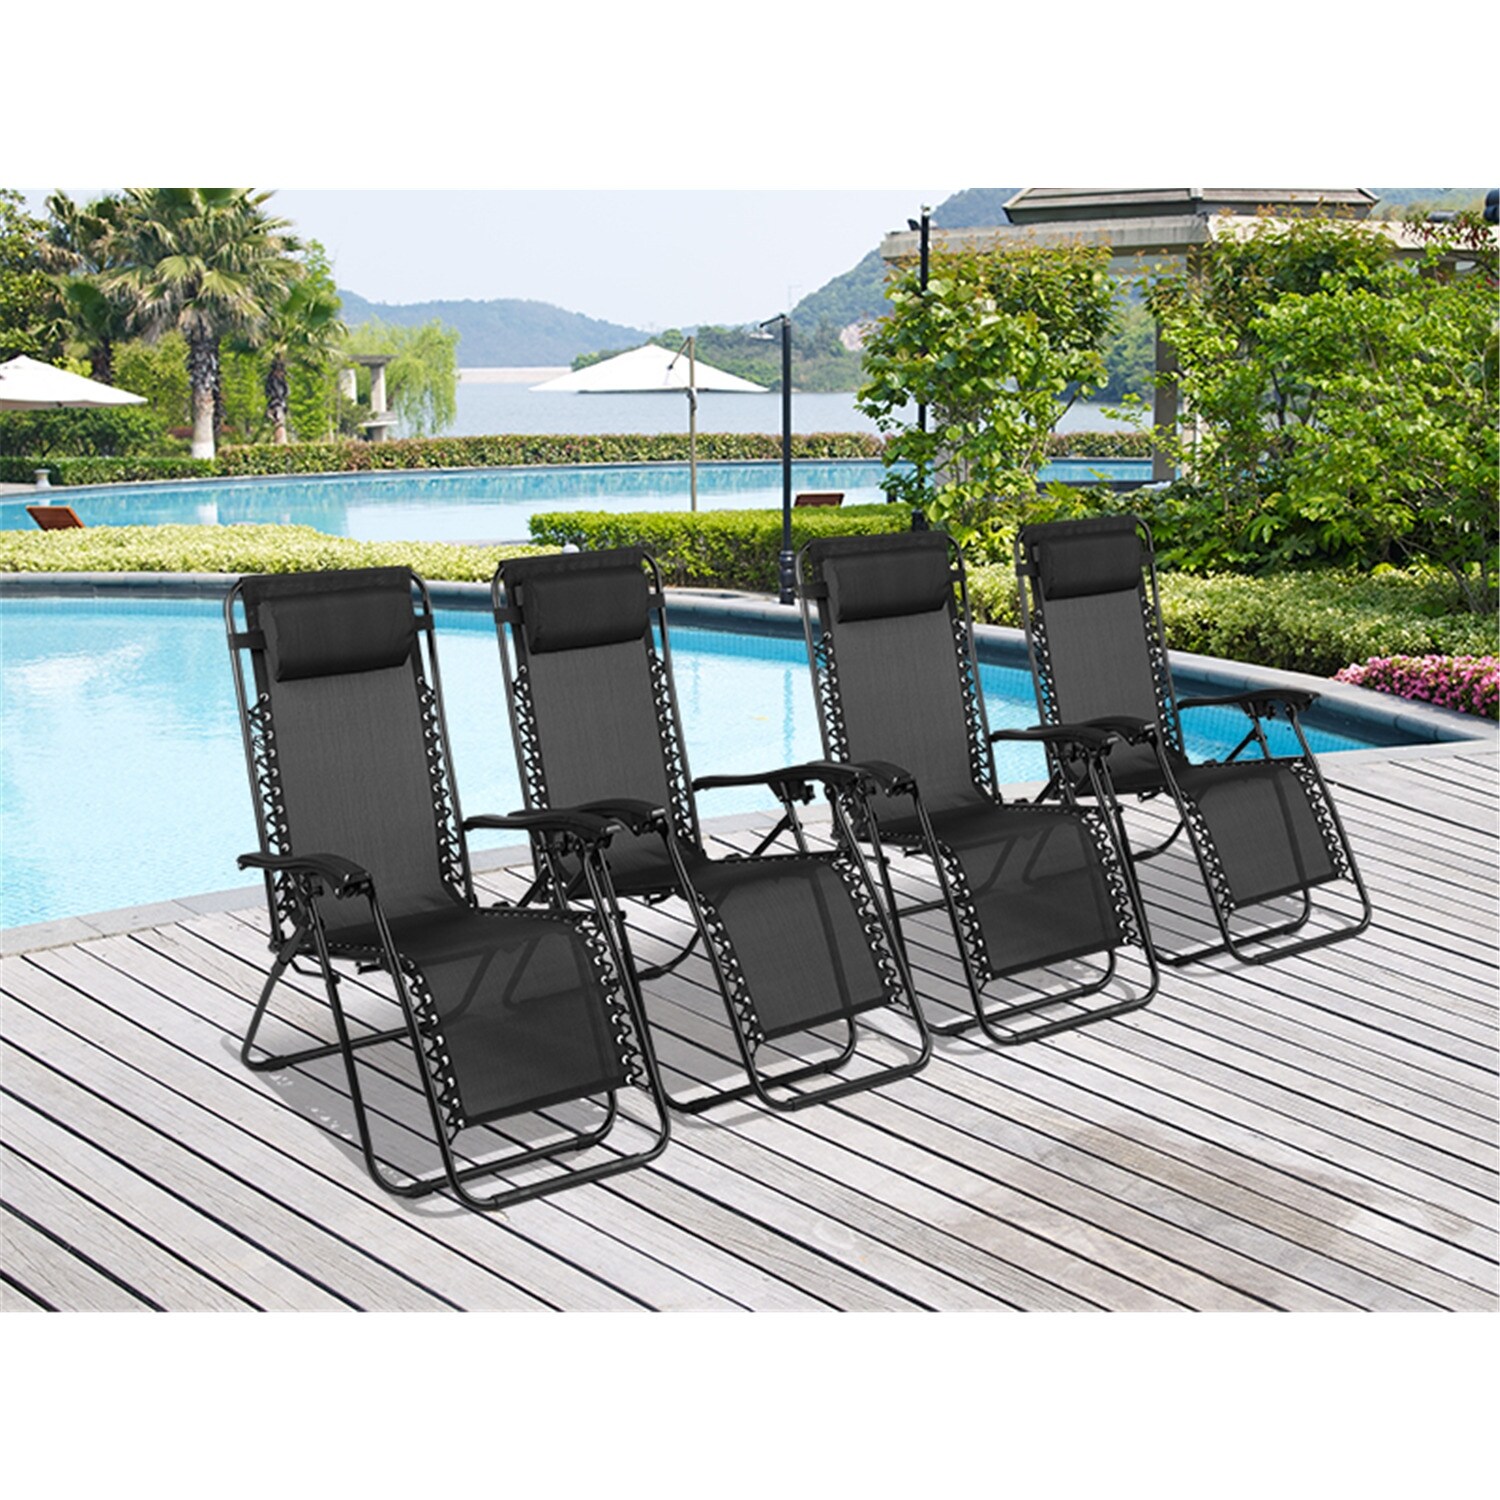 Zero Gravity Chairs Set of 4 Pool Lounge Chair Zero Gravity Recliner Zero Gravity Lounge Chair Antigravity Chairs with Headrest Grey - image 3 of 6